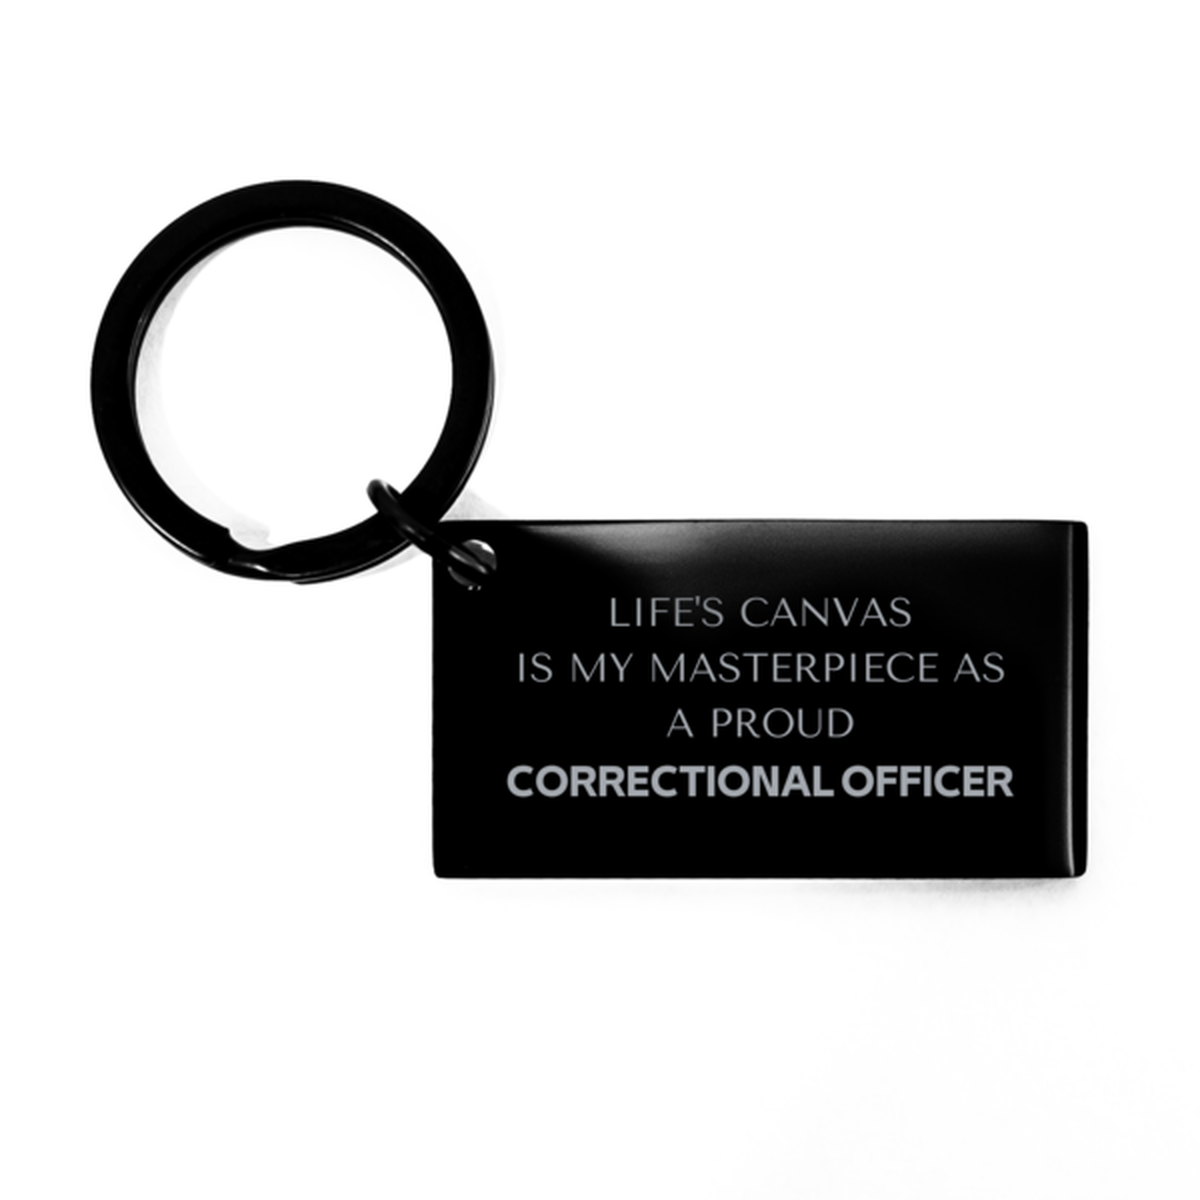 Proud Correctional Officer Gifts, Life's canvas is my masterpiece, Epic Birthday Christmas Unique Keychain For Correctional Officer, Coworkers, Men, Women, Friends